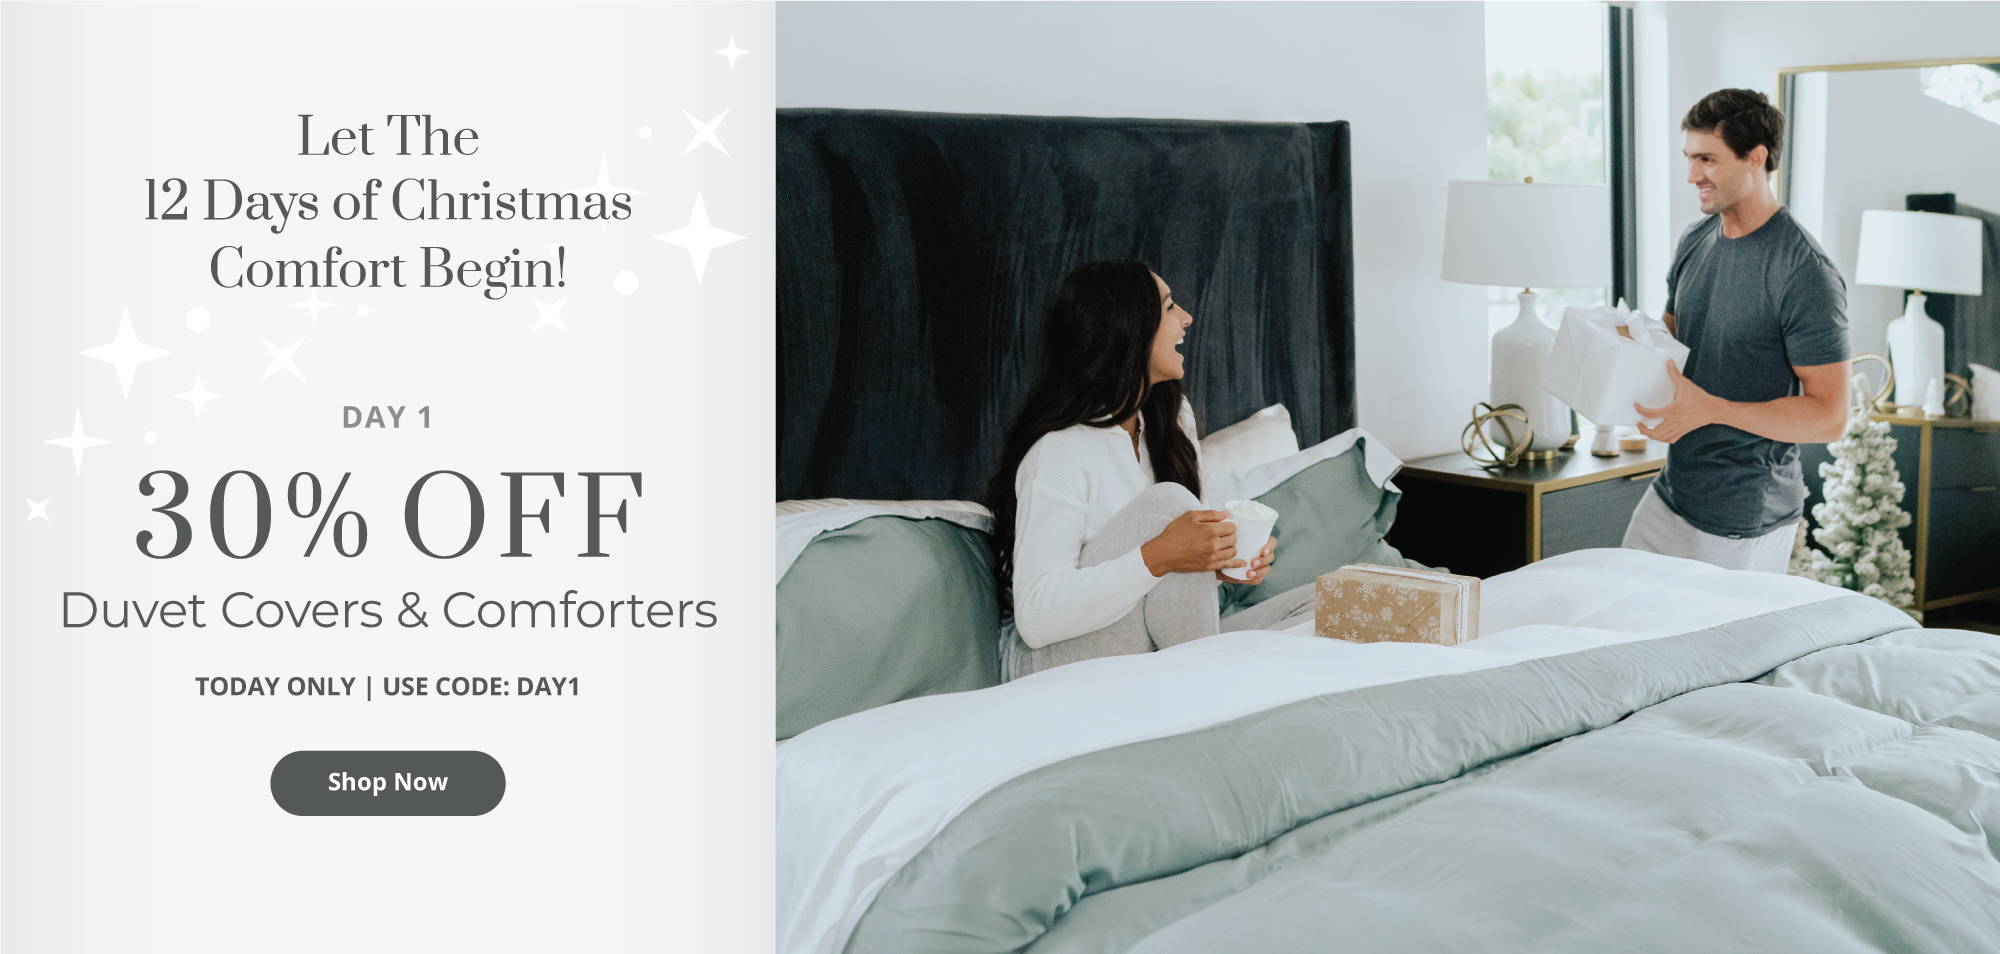 30% off duvets and comforters